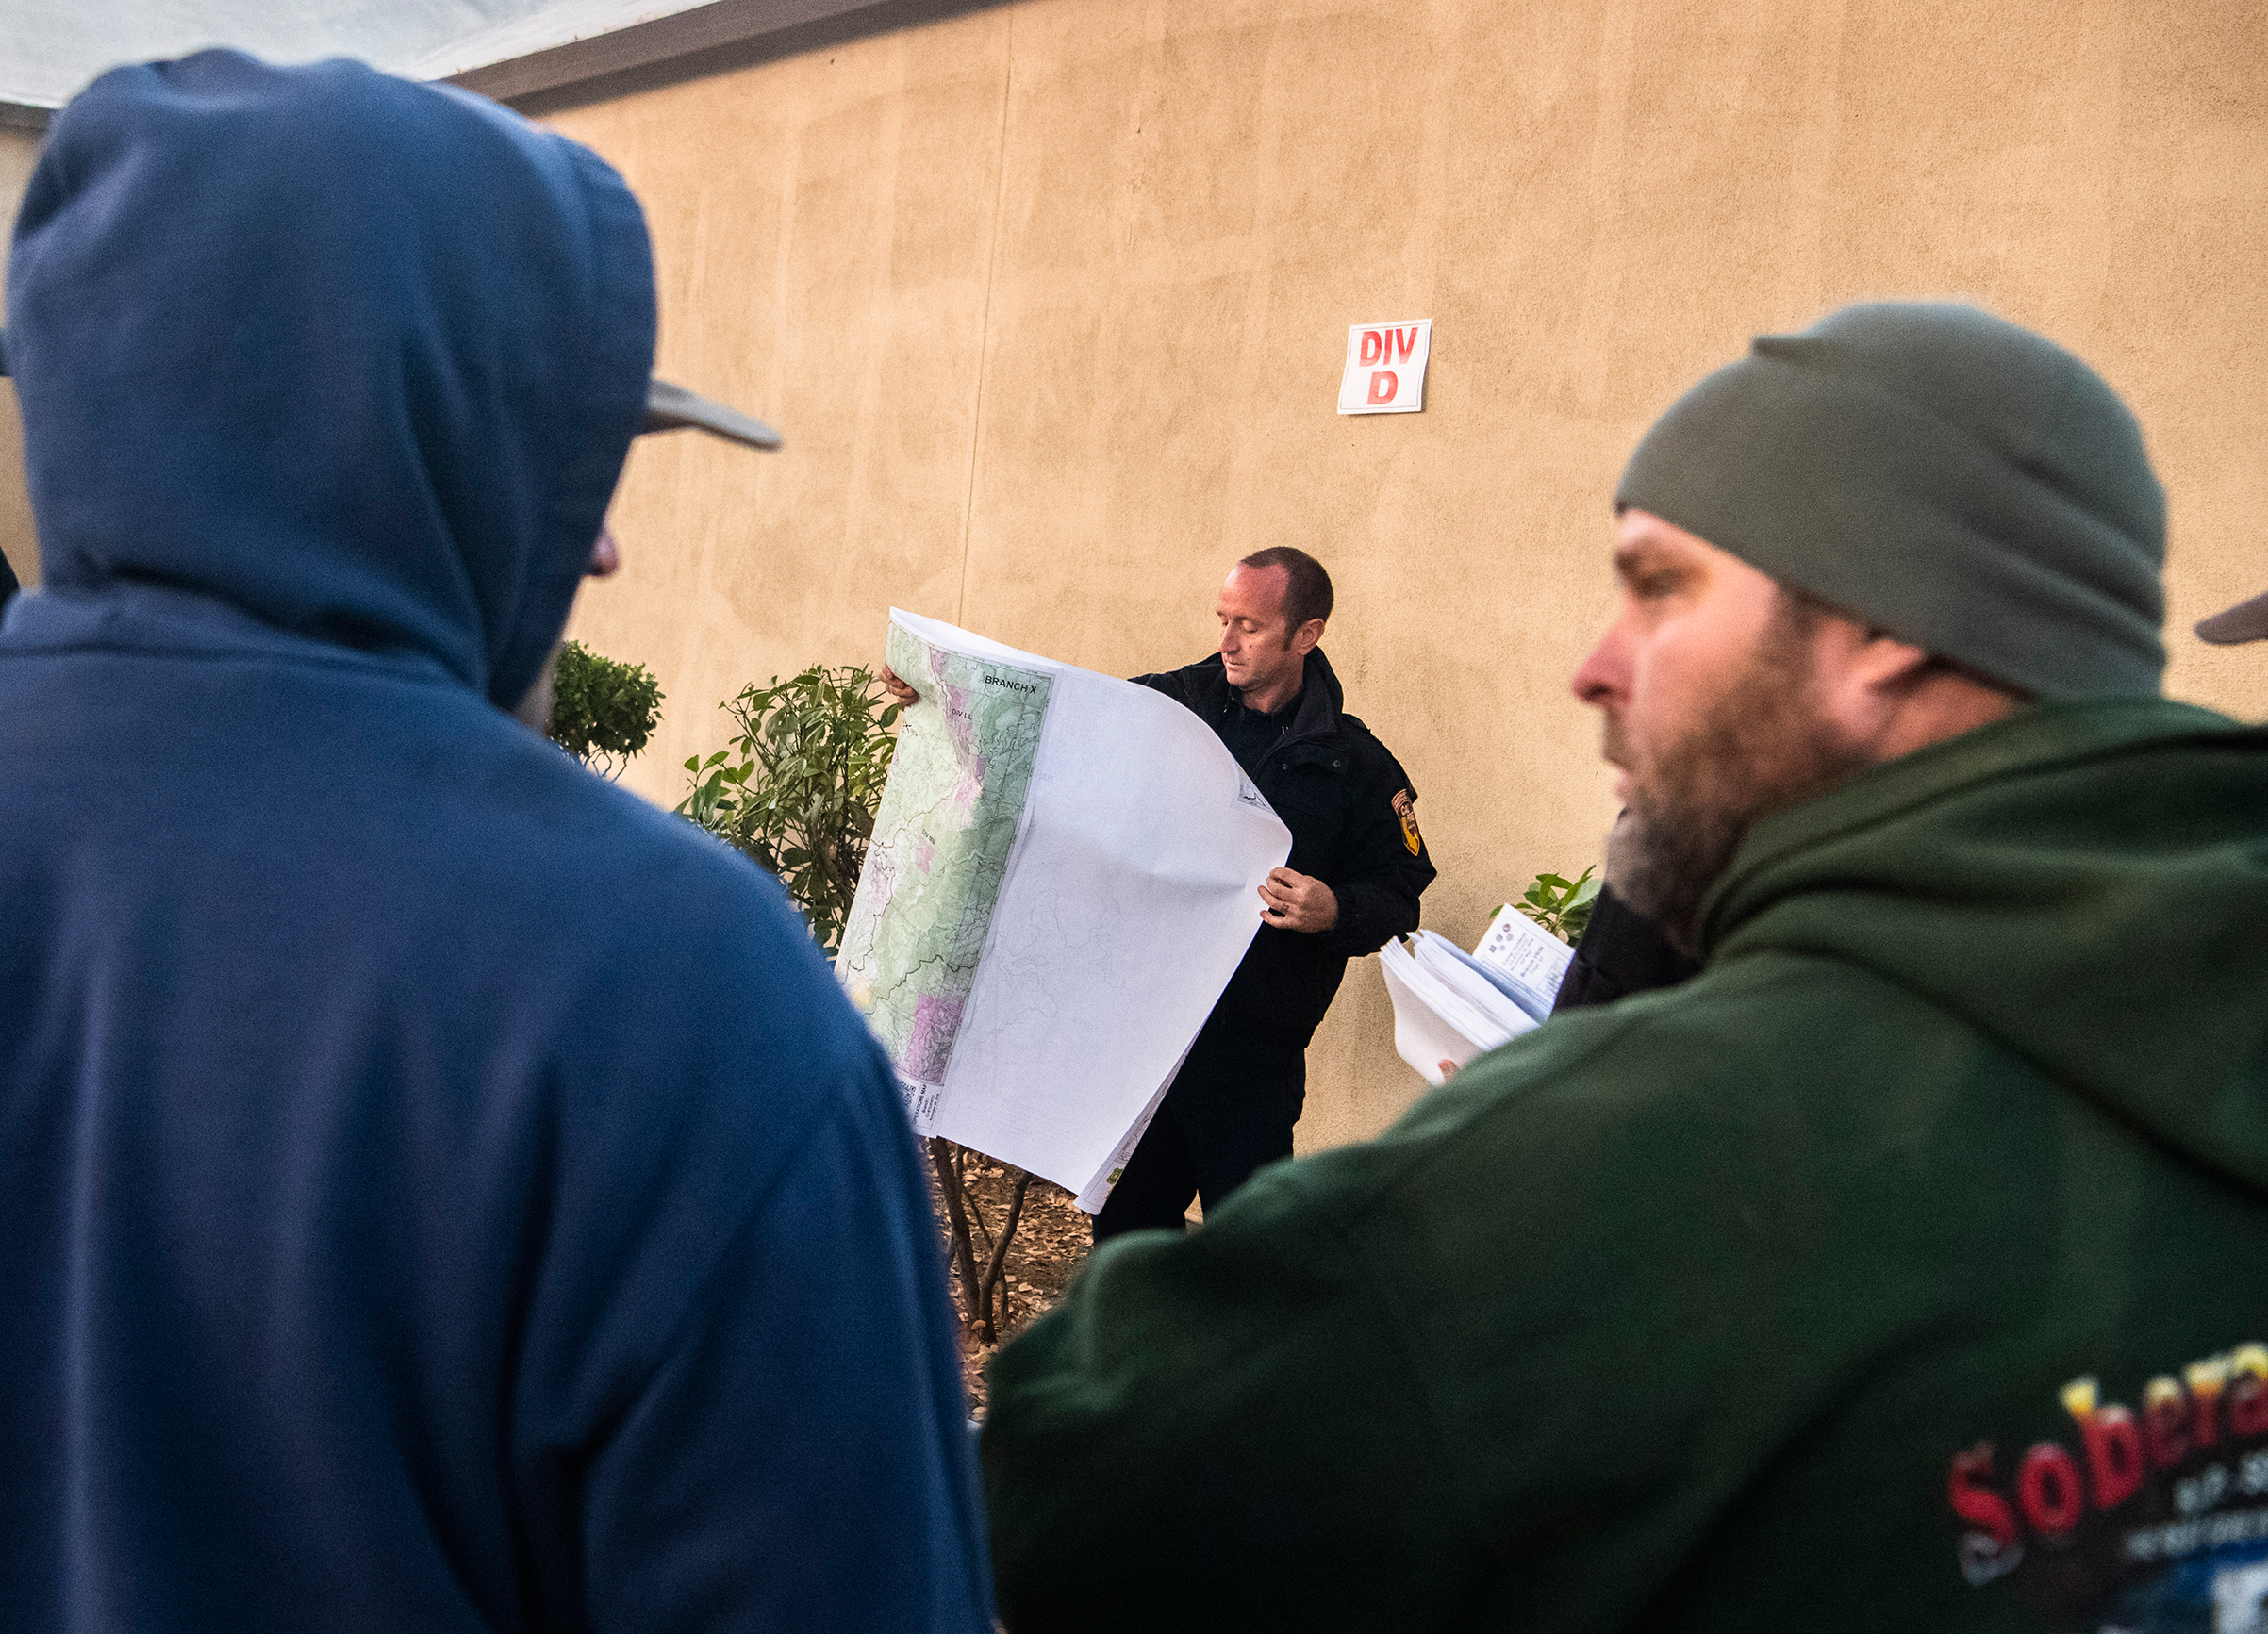 A firefighter unfurls a map for the division Delta briefing at the Camp Fire incident command post on Nov. 20, 2018. (Stuart Palley for TIME)